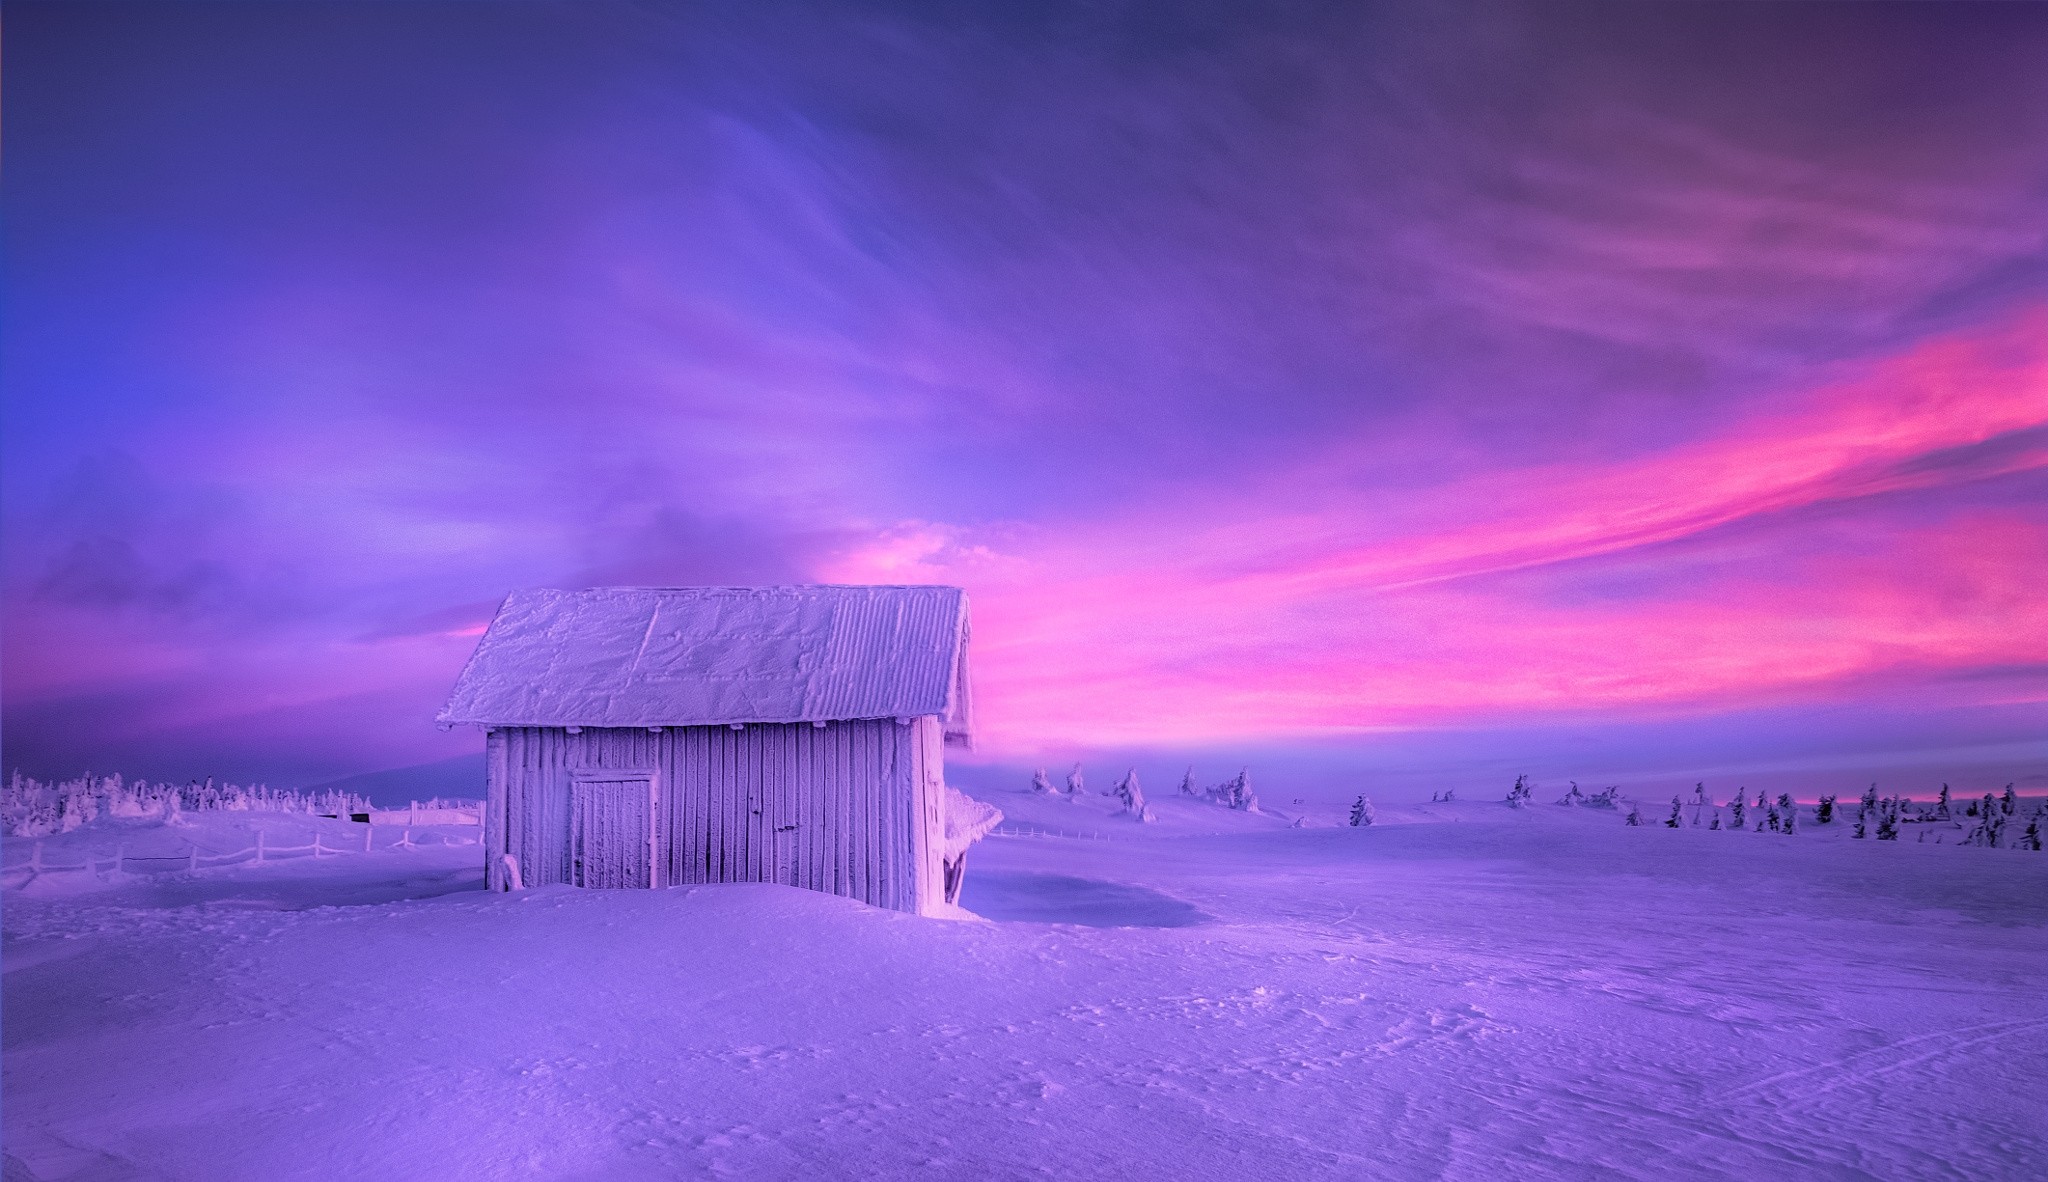 General 2048x1182 nature landscape hut snow winter sky Norway cold frost fence pine trees pink nordic landscapes low light